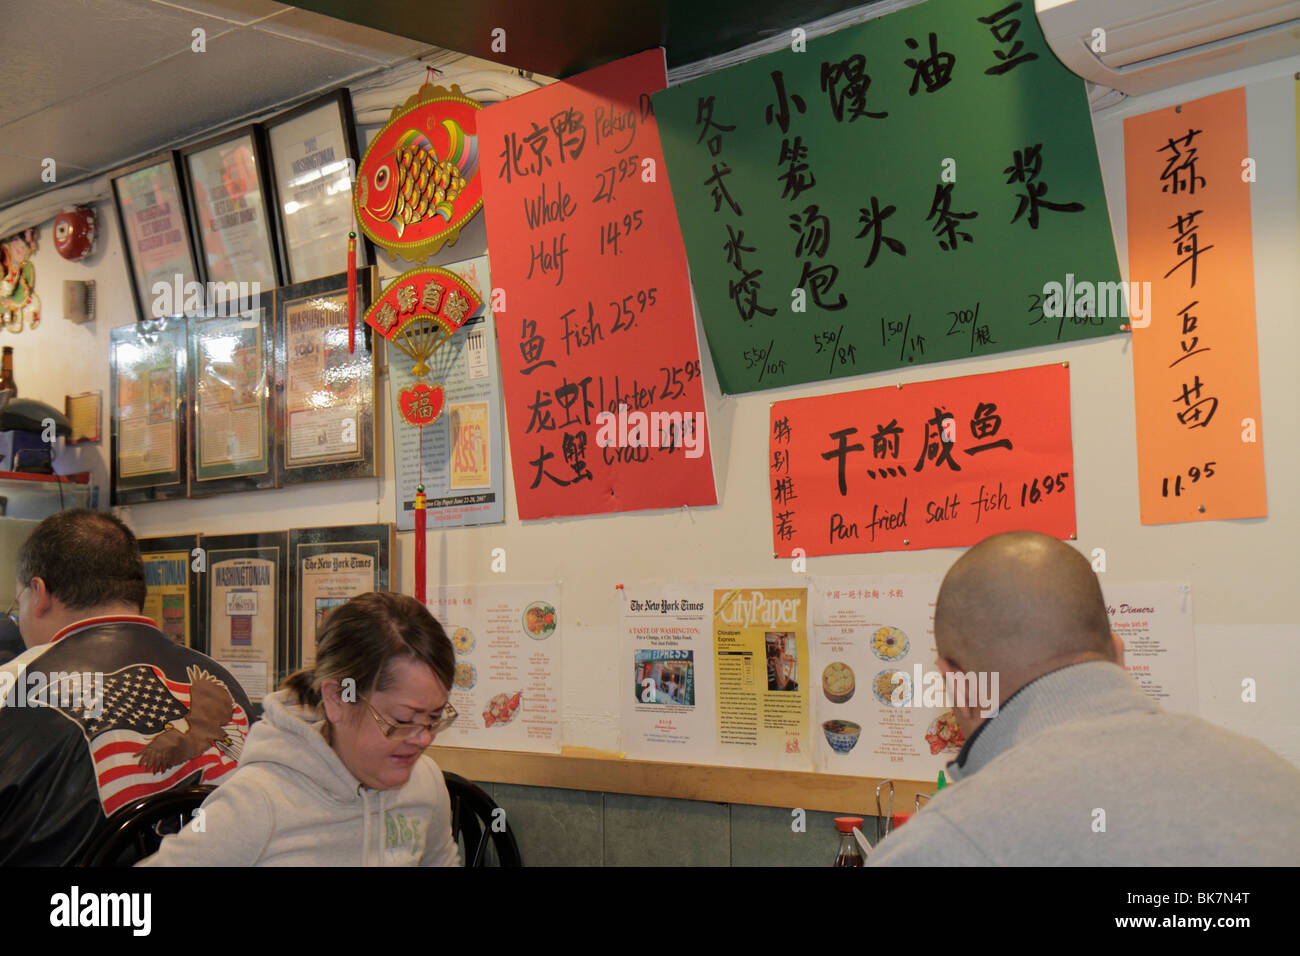 Washington DC Washingto,D.C.,Chinatown,6th Street NW,Chinatown Express,restaurant restaurants food dining eating out cafe cafes bistro,service,cuisine Stock Photo